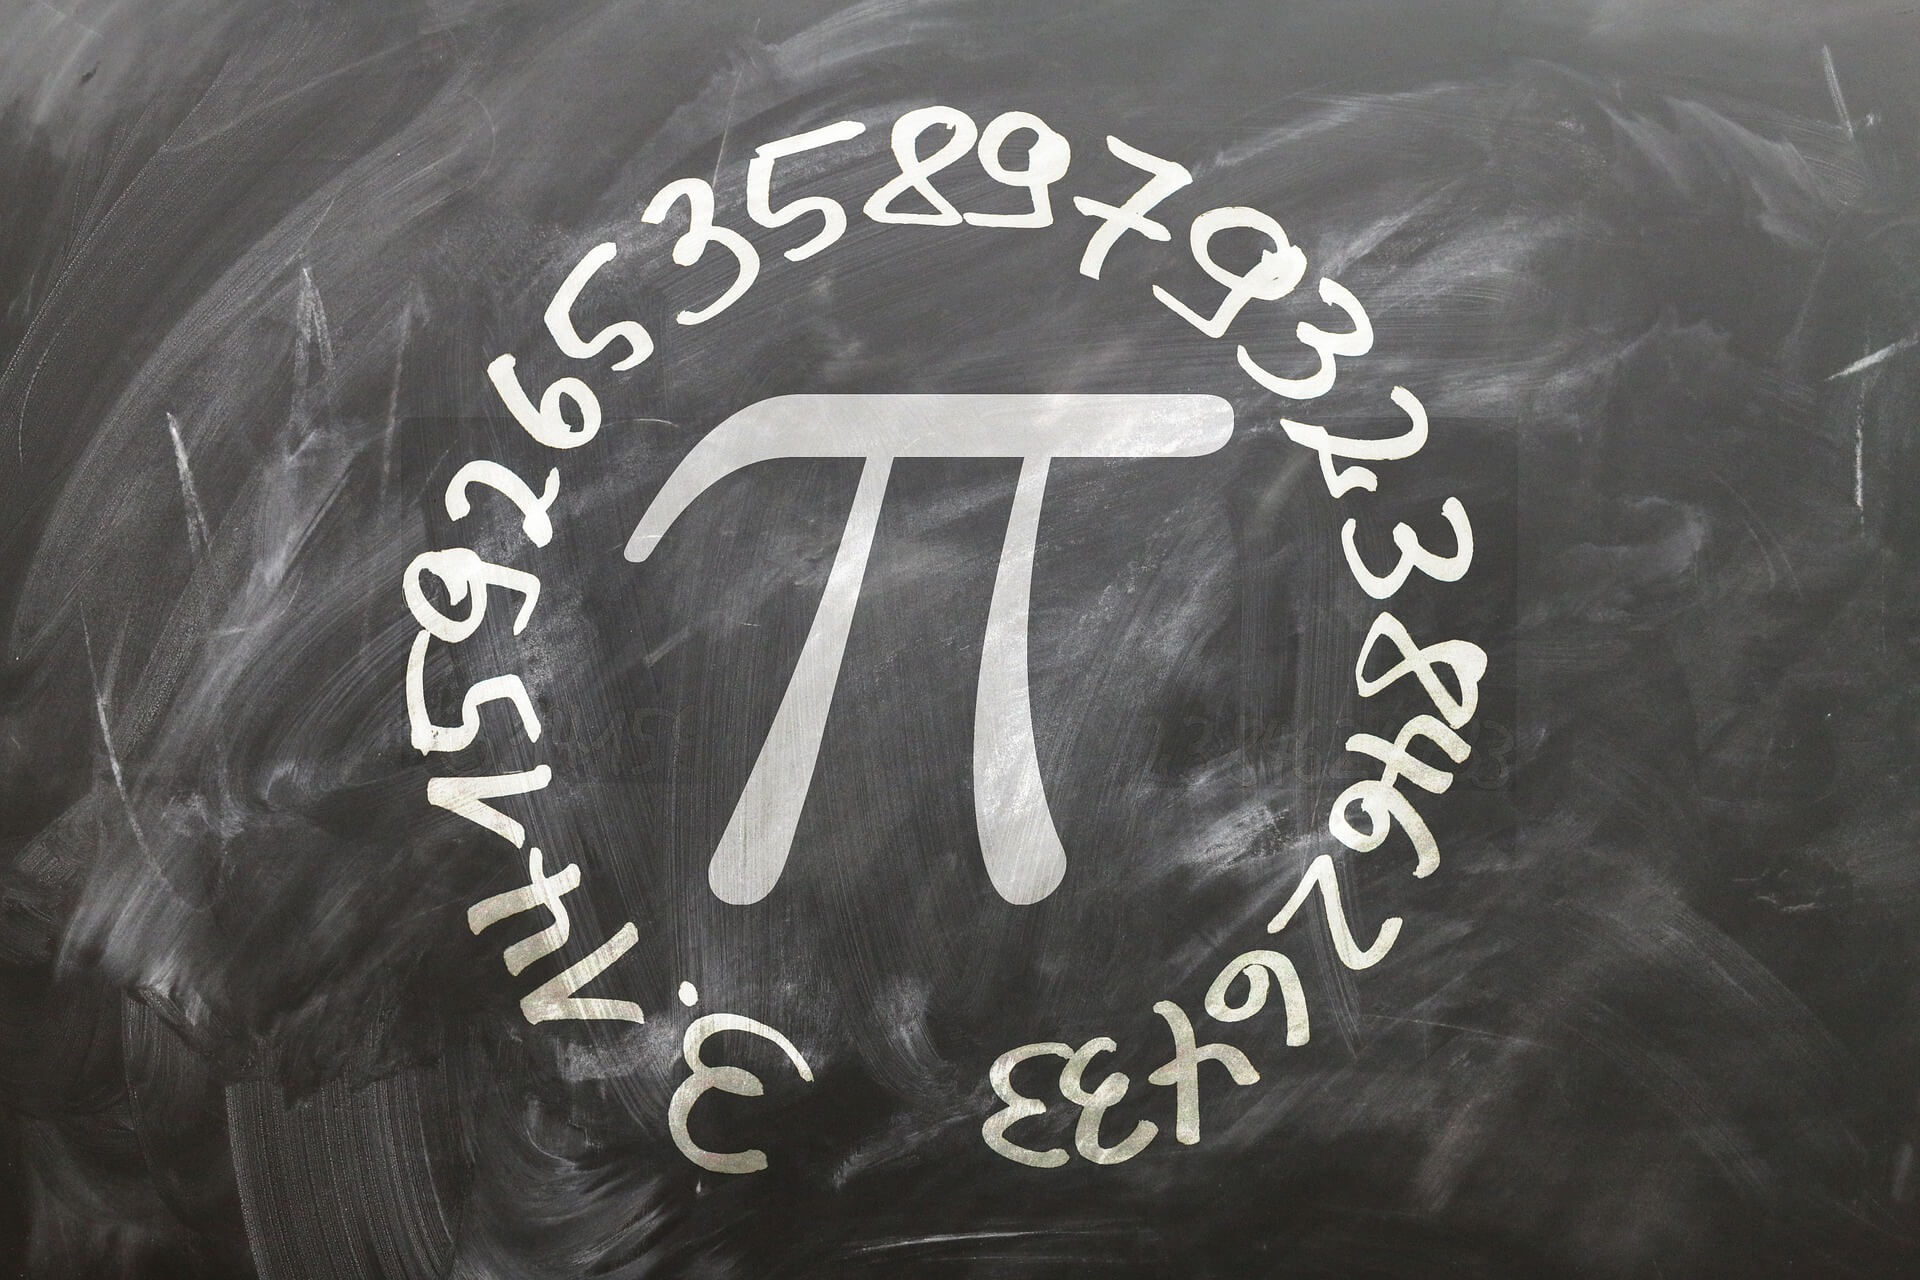 Learn about the lessons you can use to celebrate Pi Day (3.14) across many subjects such as math, science. and art.